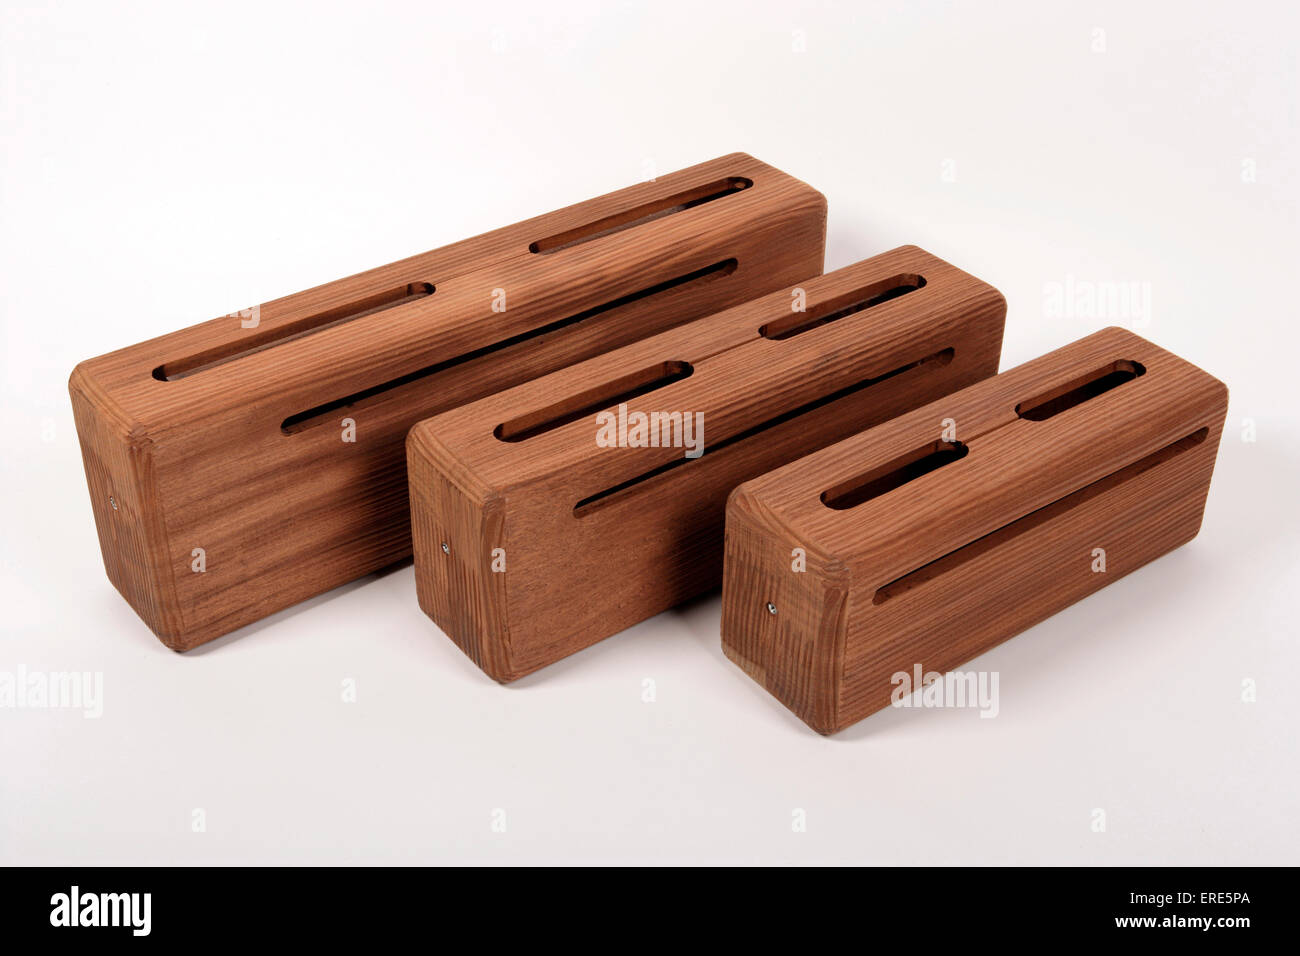 Log Drums, Slit drum, three different sizes, high medium and low. Made from wood. Stock Photo